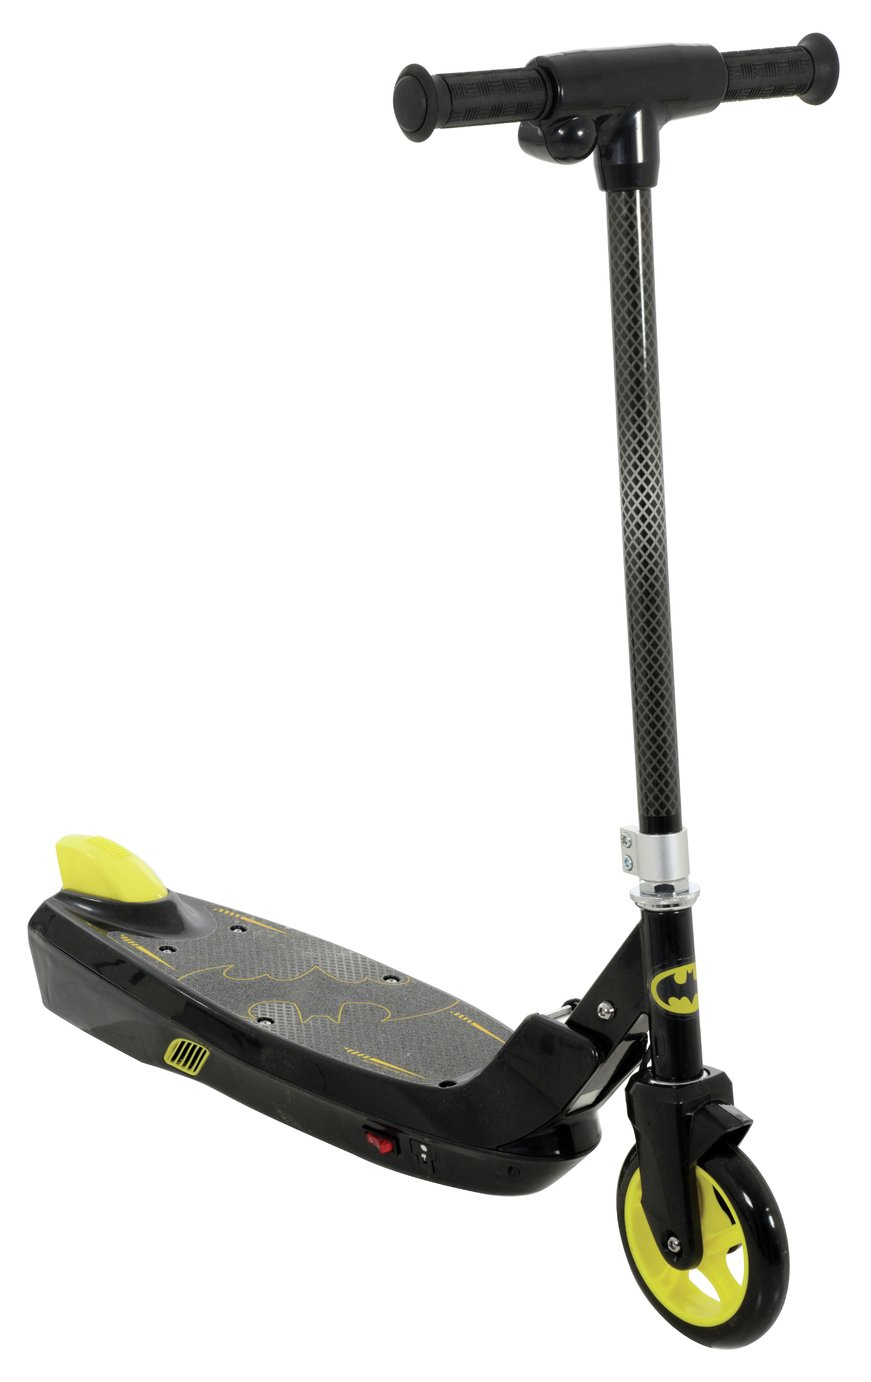 Batman 24V Electric Scooter Review